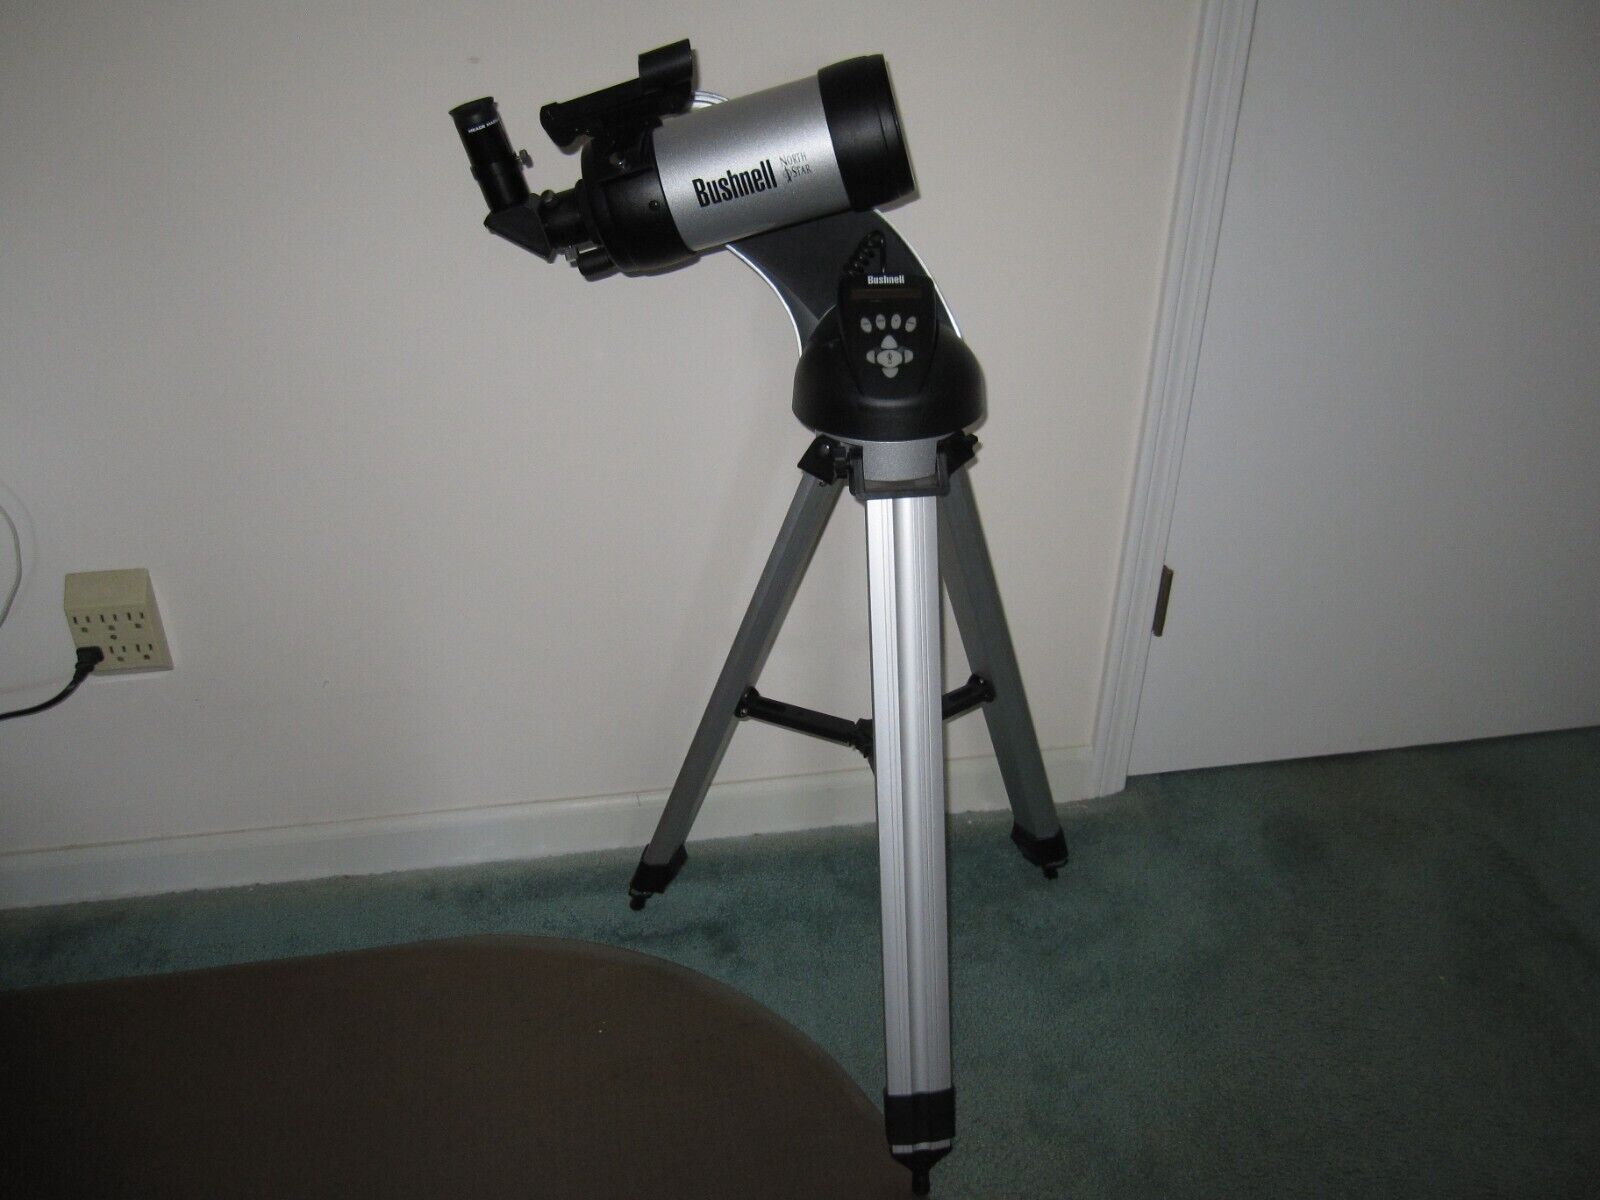 Bushnell NorthStar 90mm Catadioptric Telescope No. 78-8890 with Stand.